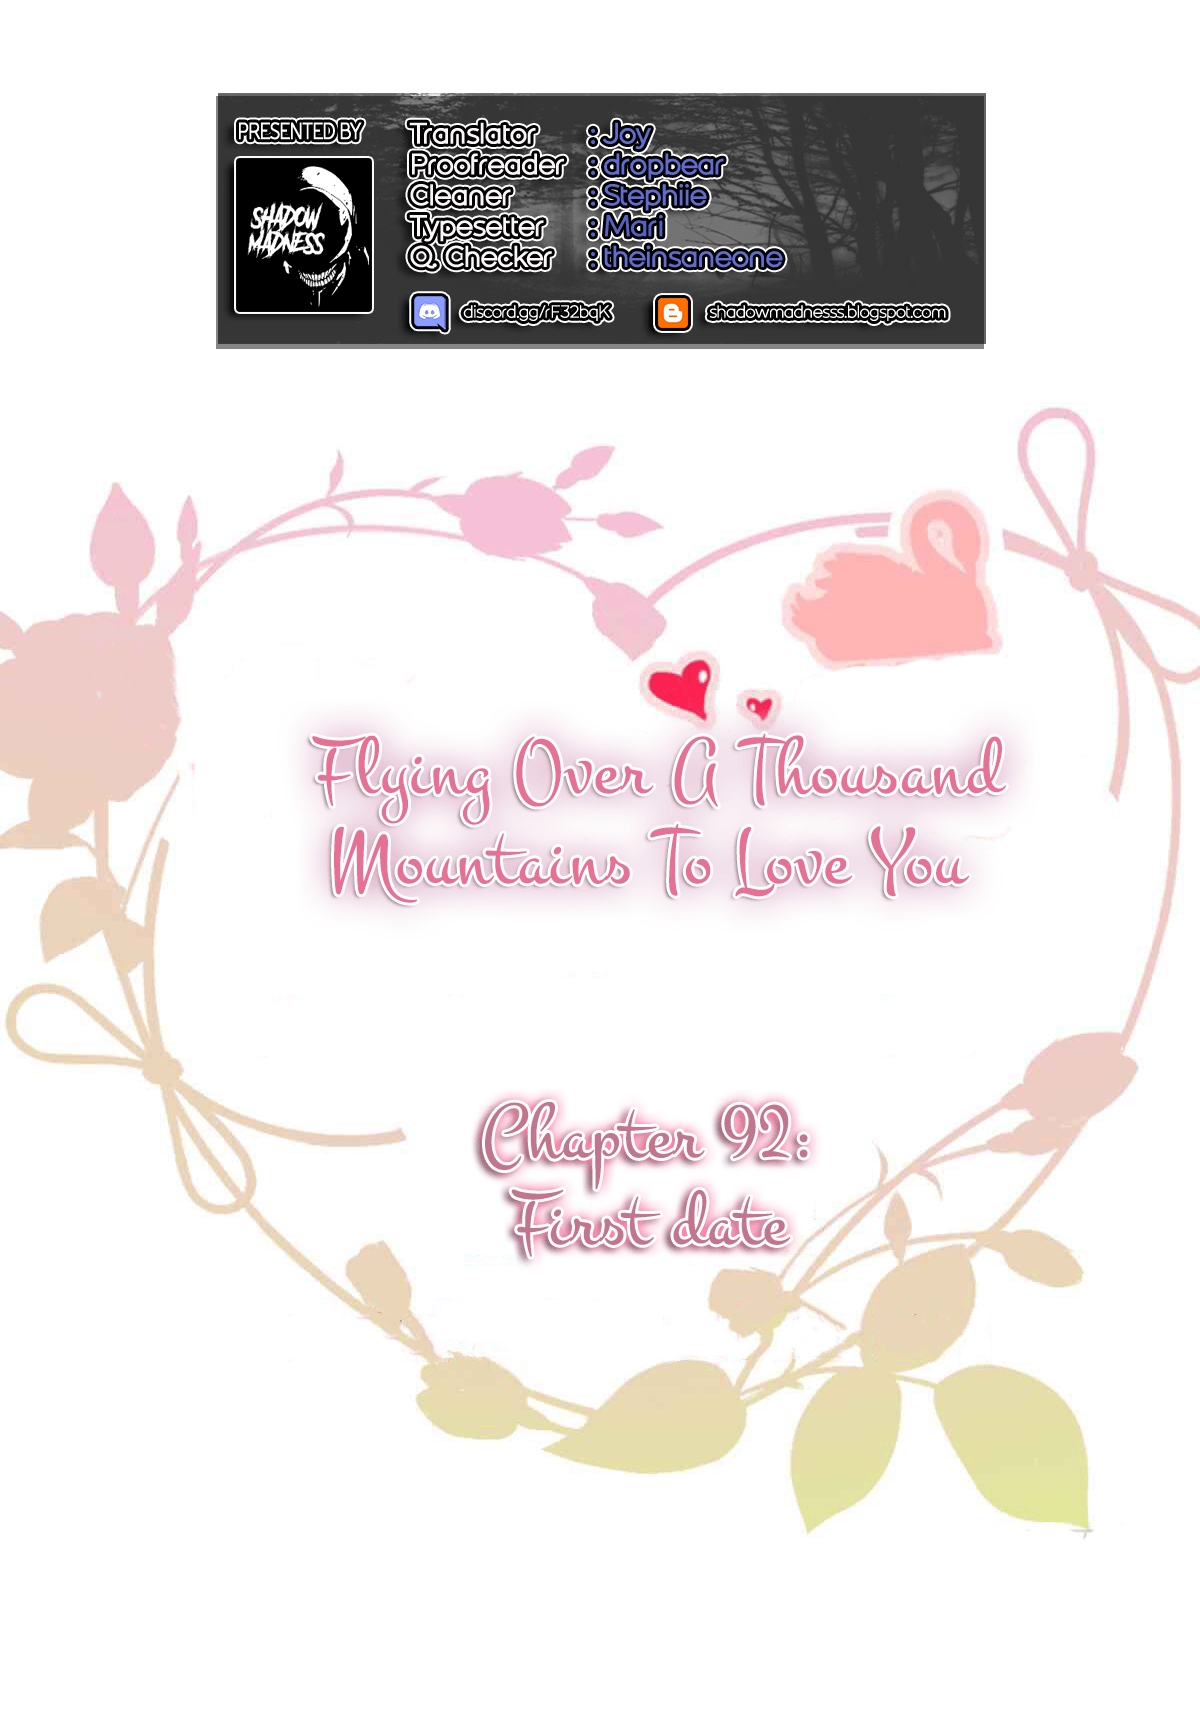 Flying Over a Thousand Mountains to Love You Ch. 92 First date